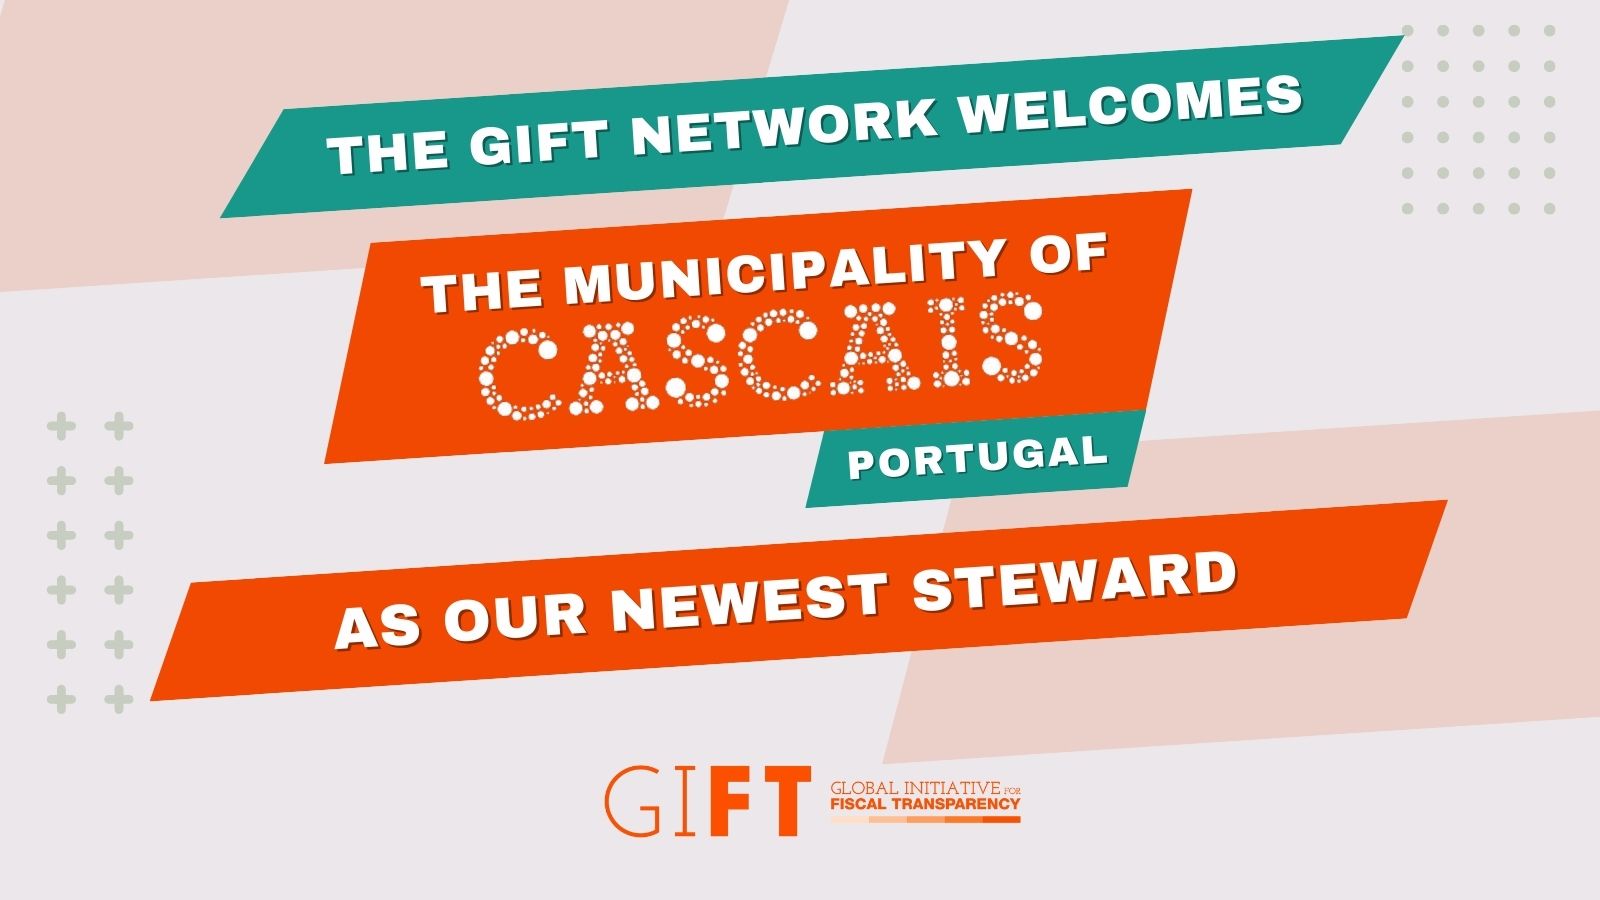 GIFT Network welcomes the Municipality of Cascais as its newest steward